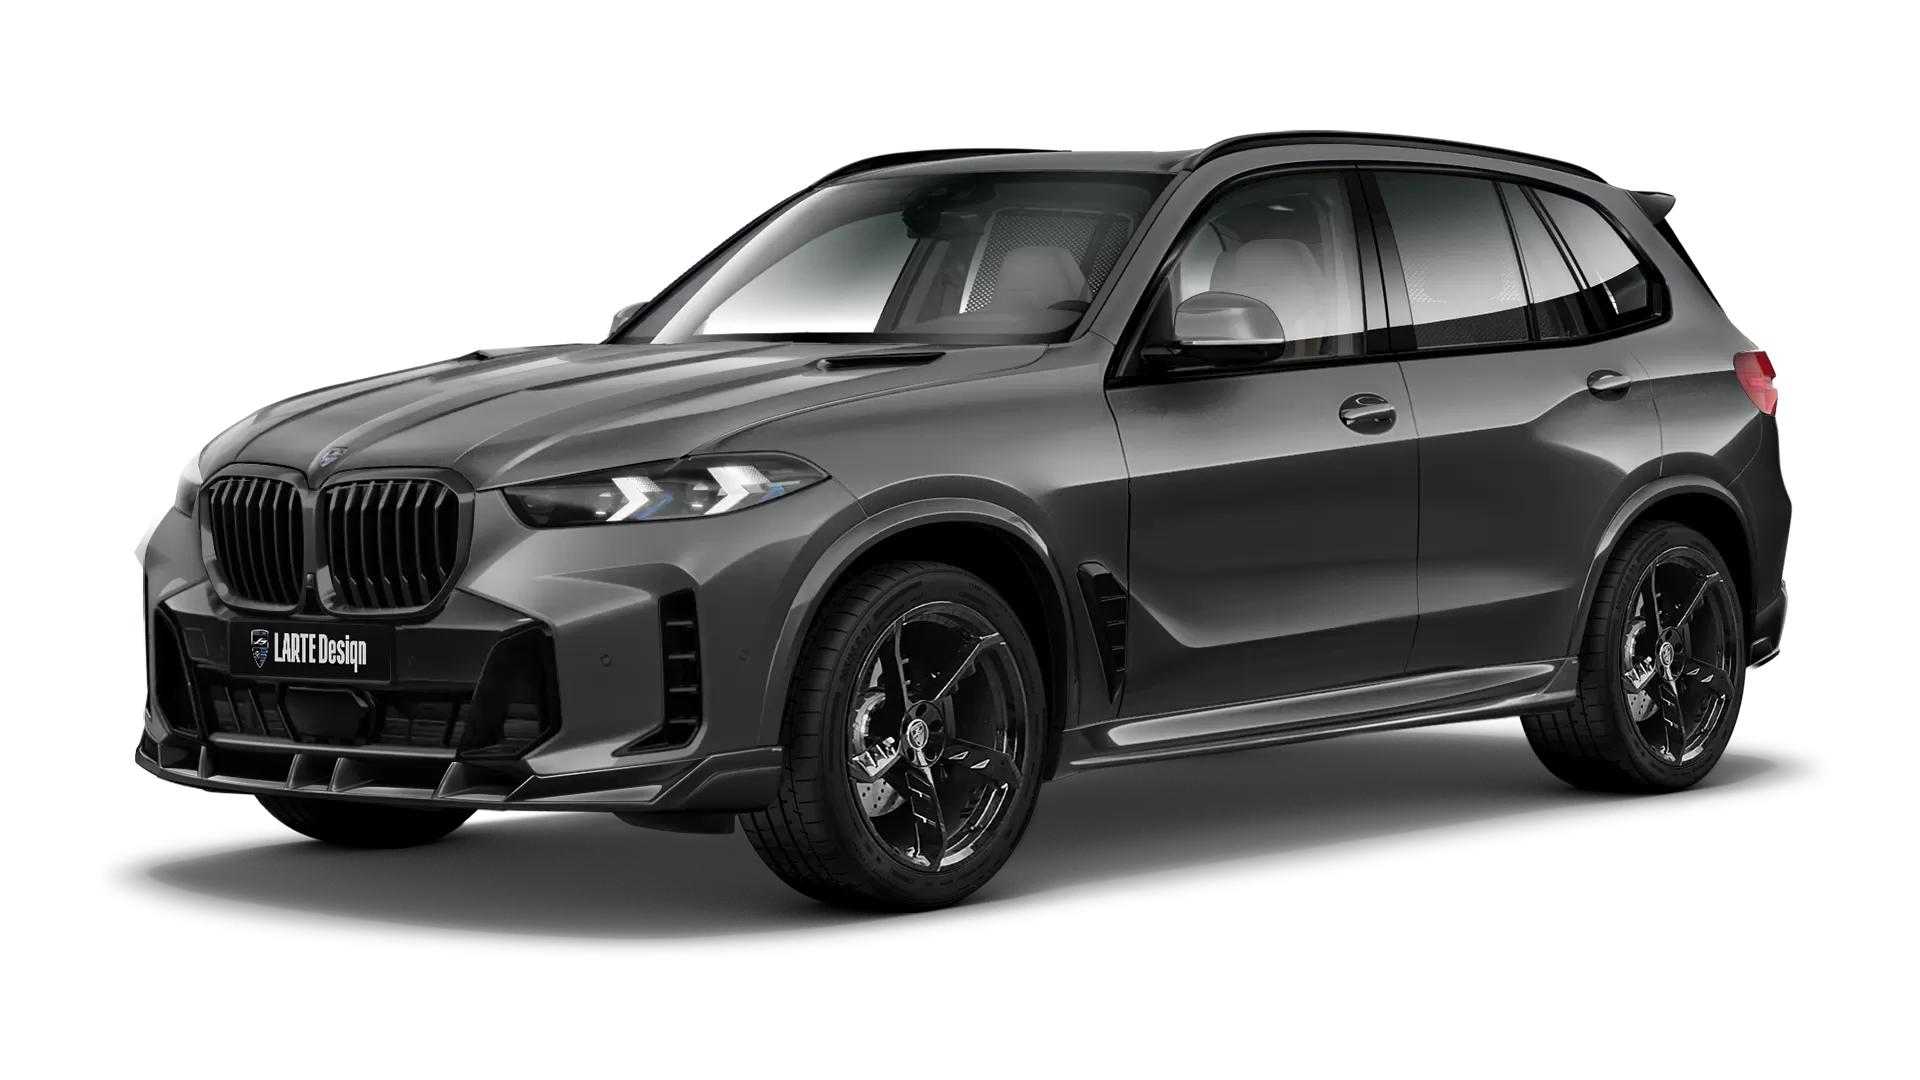 BMW X5 G05 LCI Facelift with painted body kit: front view shown in Dravit Grey